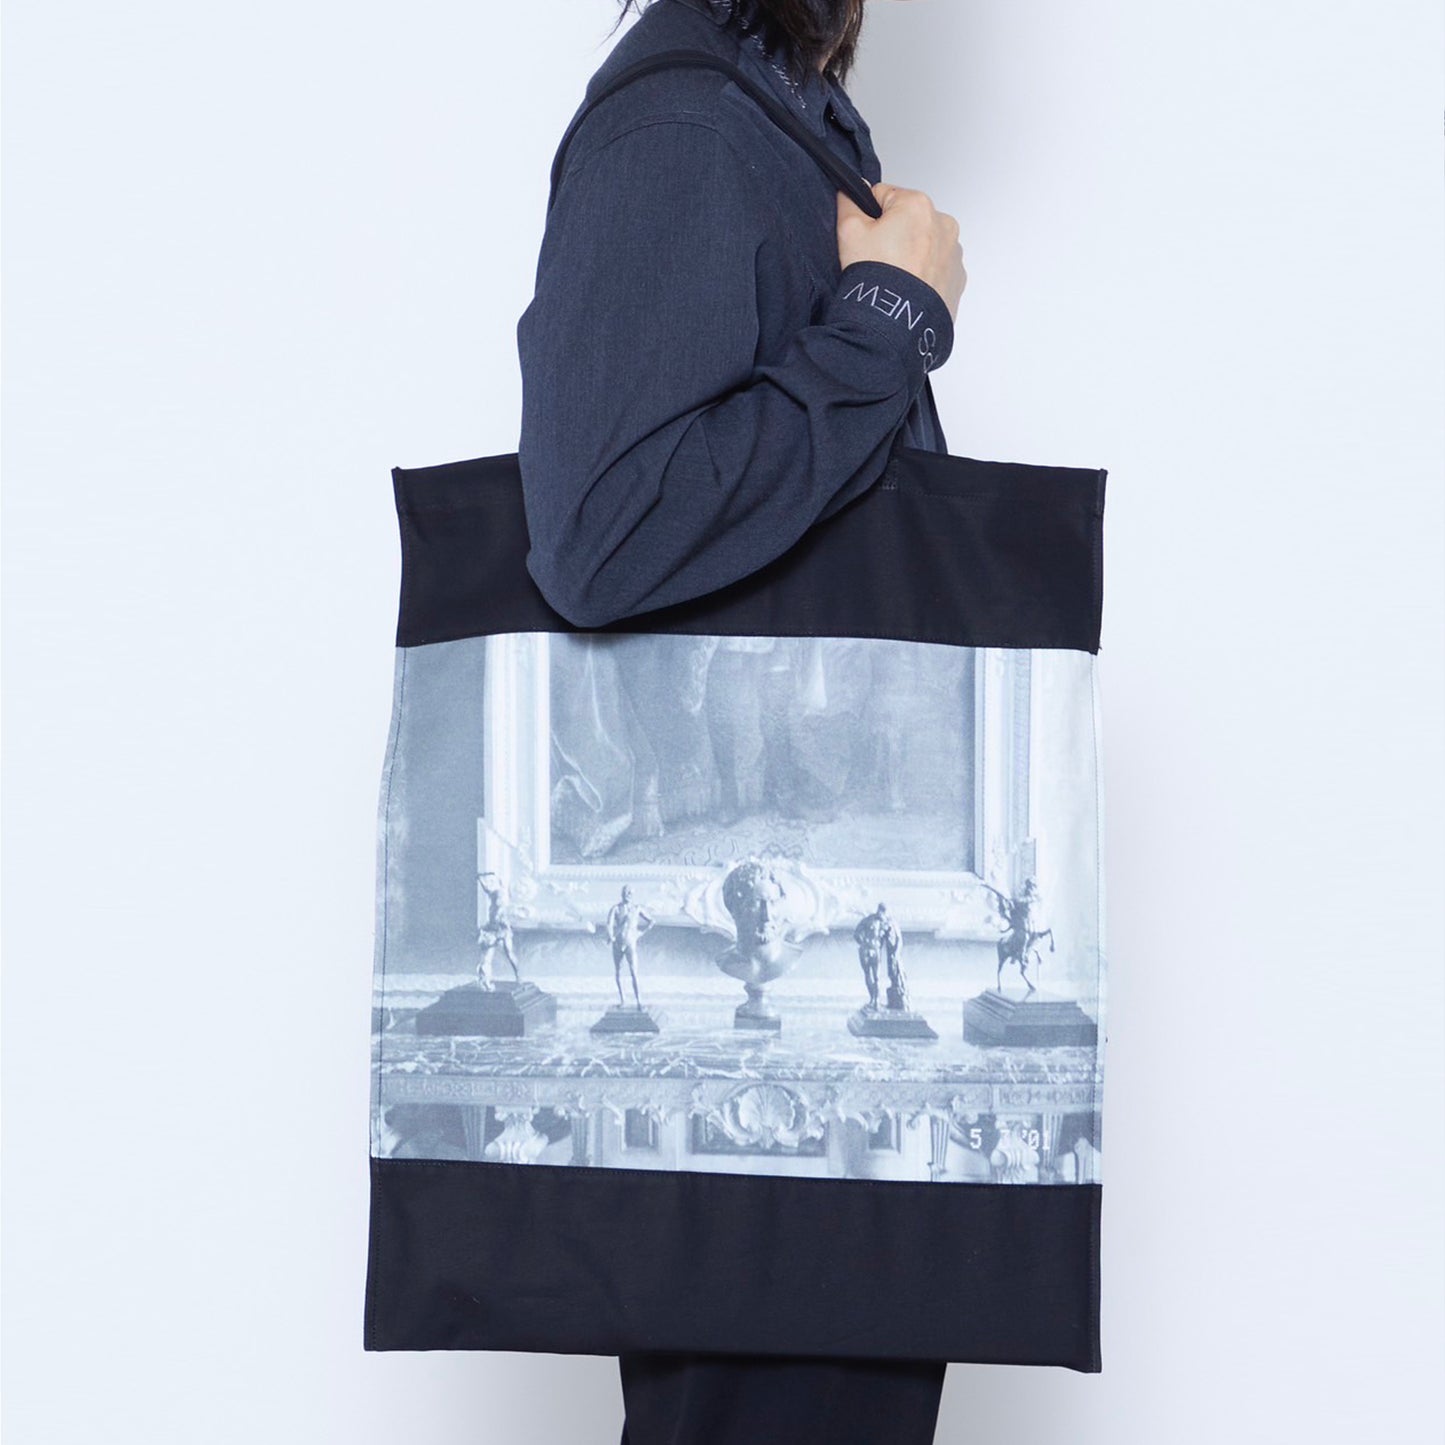 "MUSEUM SERIES" Printed Large Tote Photography by Kento Mori